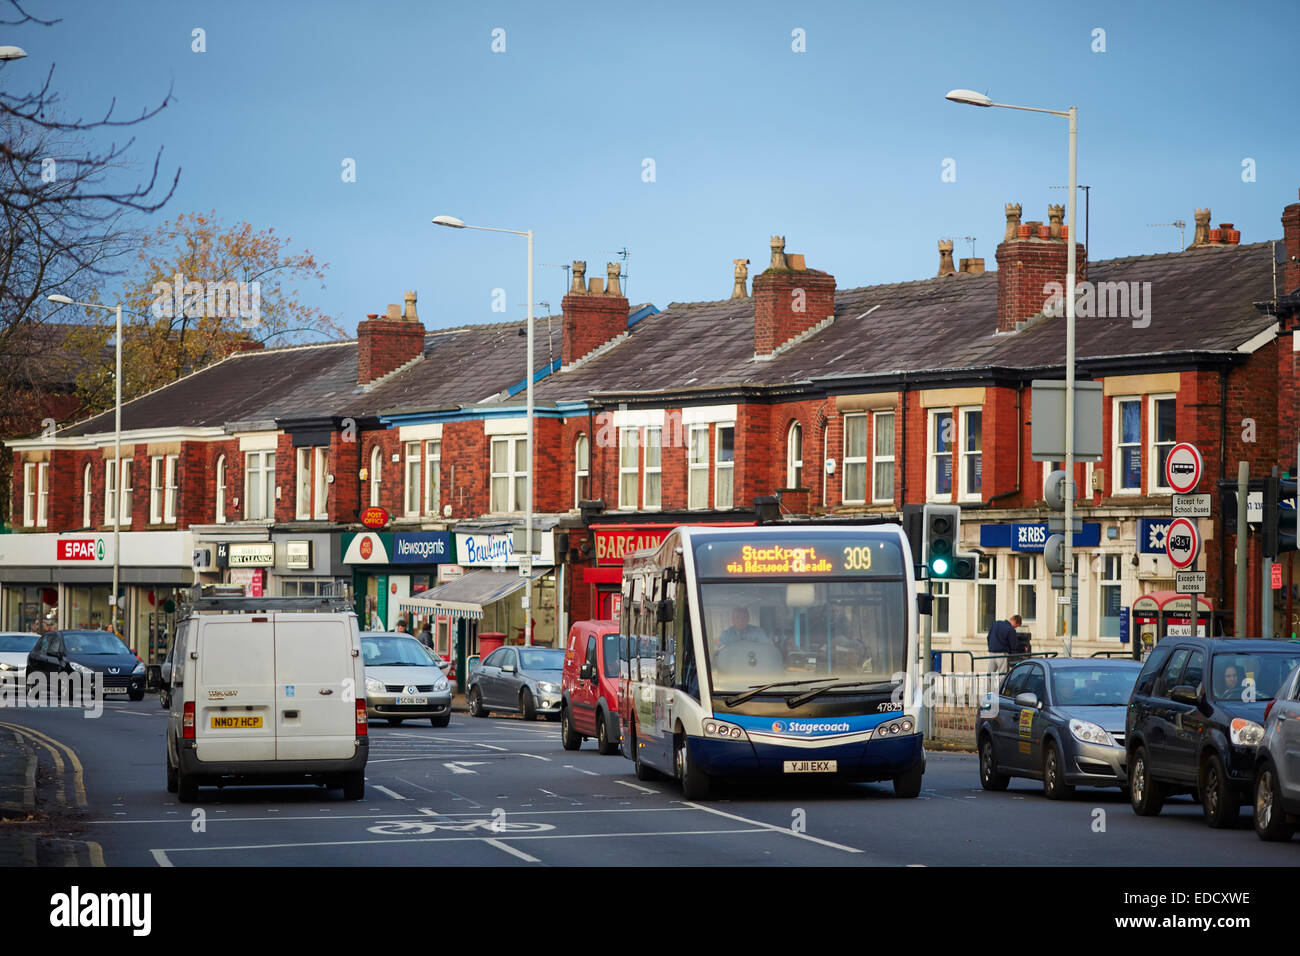 Route 309 Stagecoach single decker bus passing through Davenport village along Bramhall Lane in Stockport Cheshire. Stock Photo